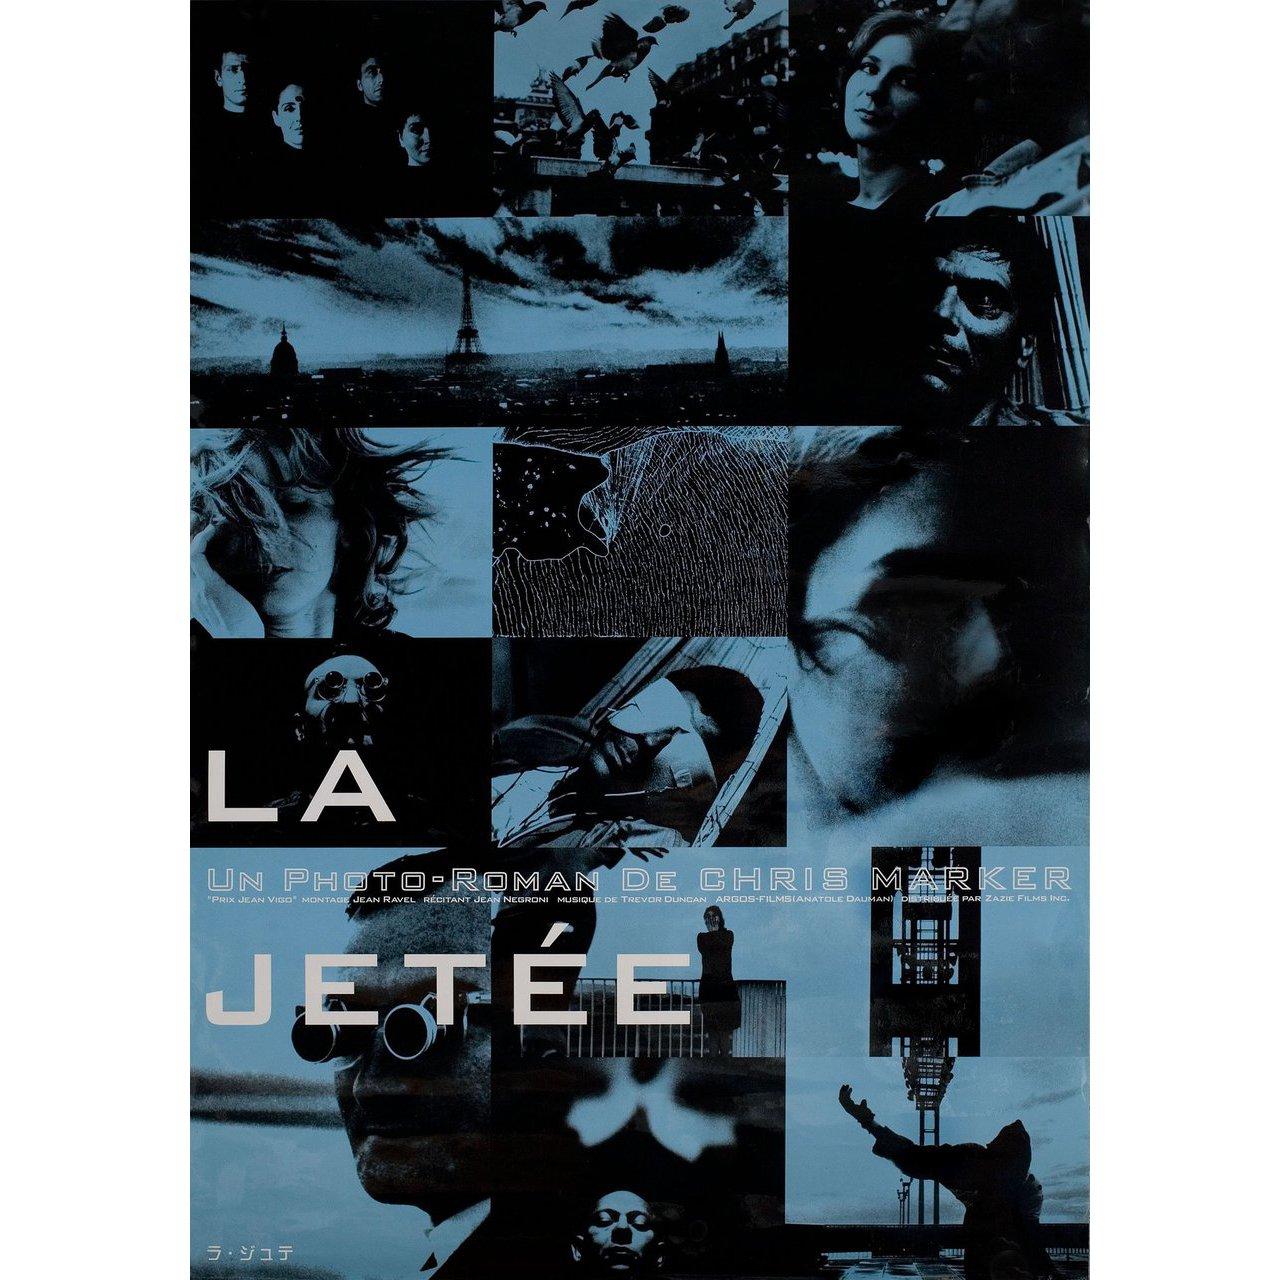 Original 1999 Japanese B2 poster for the first Japanese theatrical release of the 1962 film La Jetee directed by Chris Marker with Jean Negroni / Helene Chatelain / Davos Hanich / Jacques Ledoux. Fine rolled condition. Please note: the size is